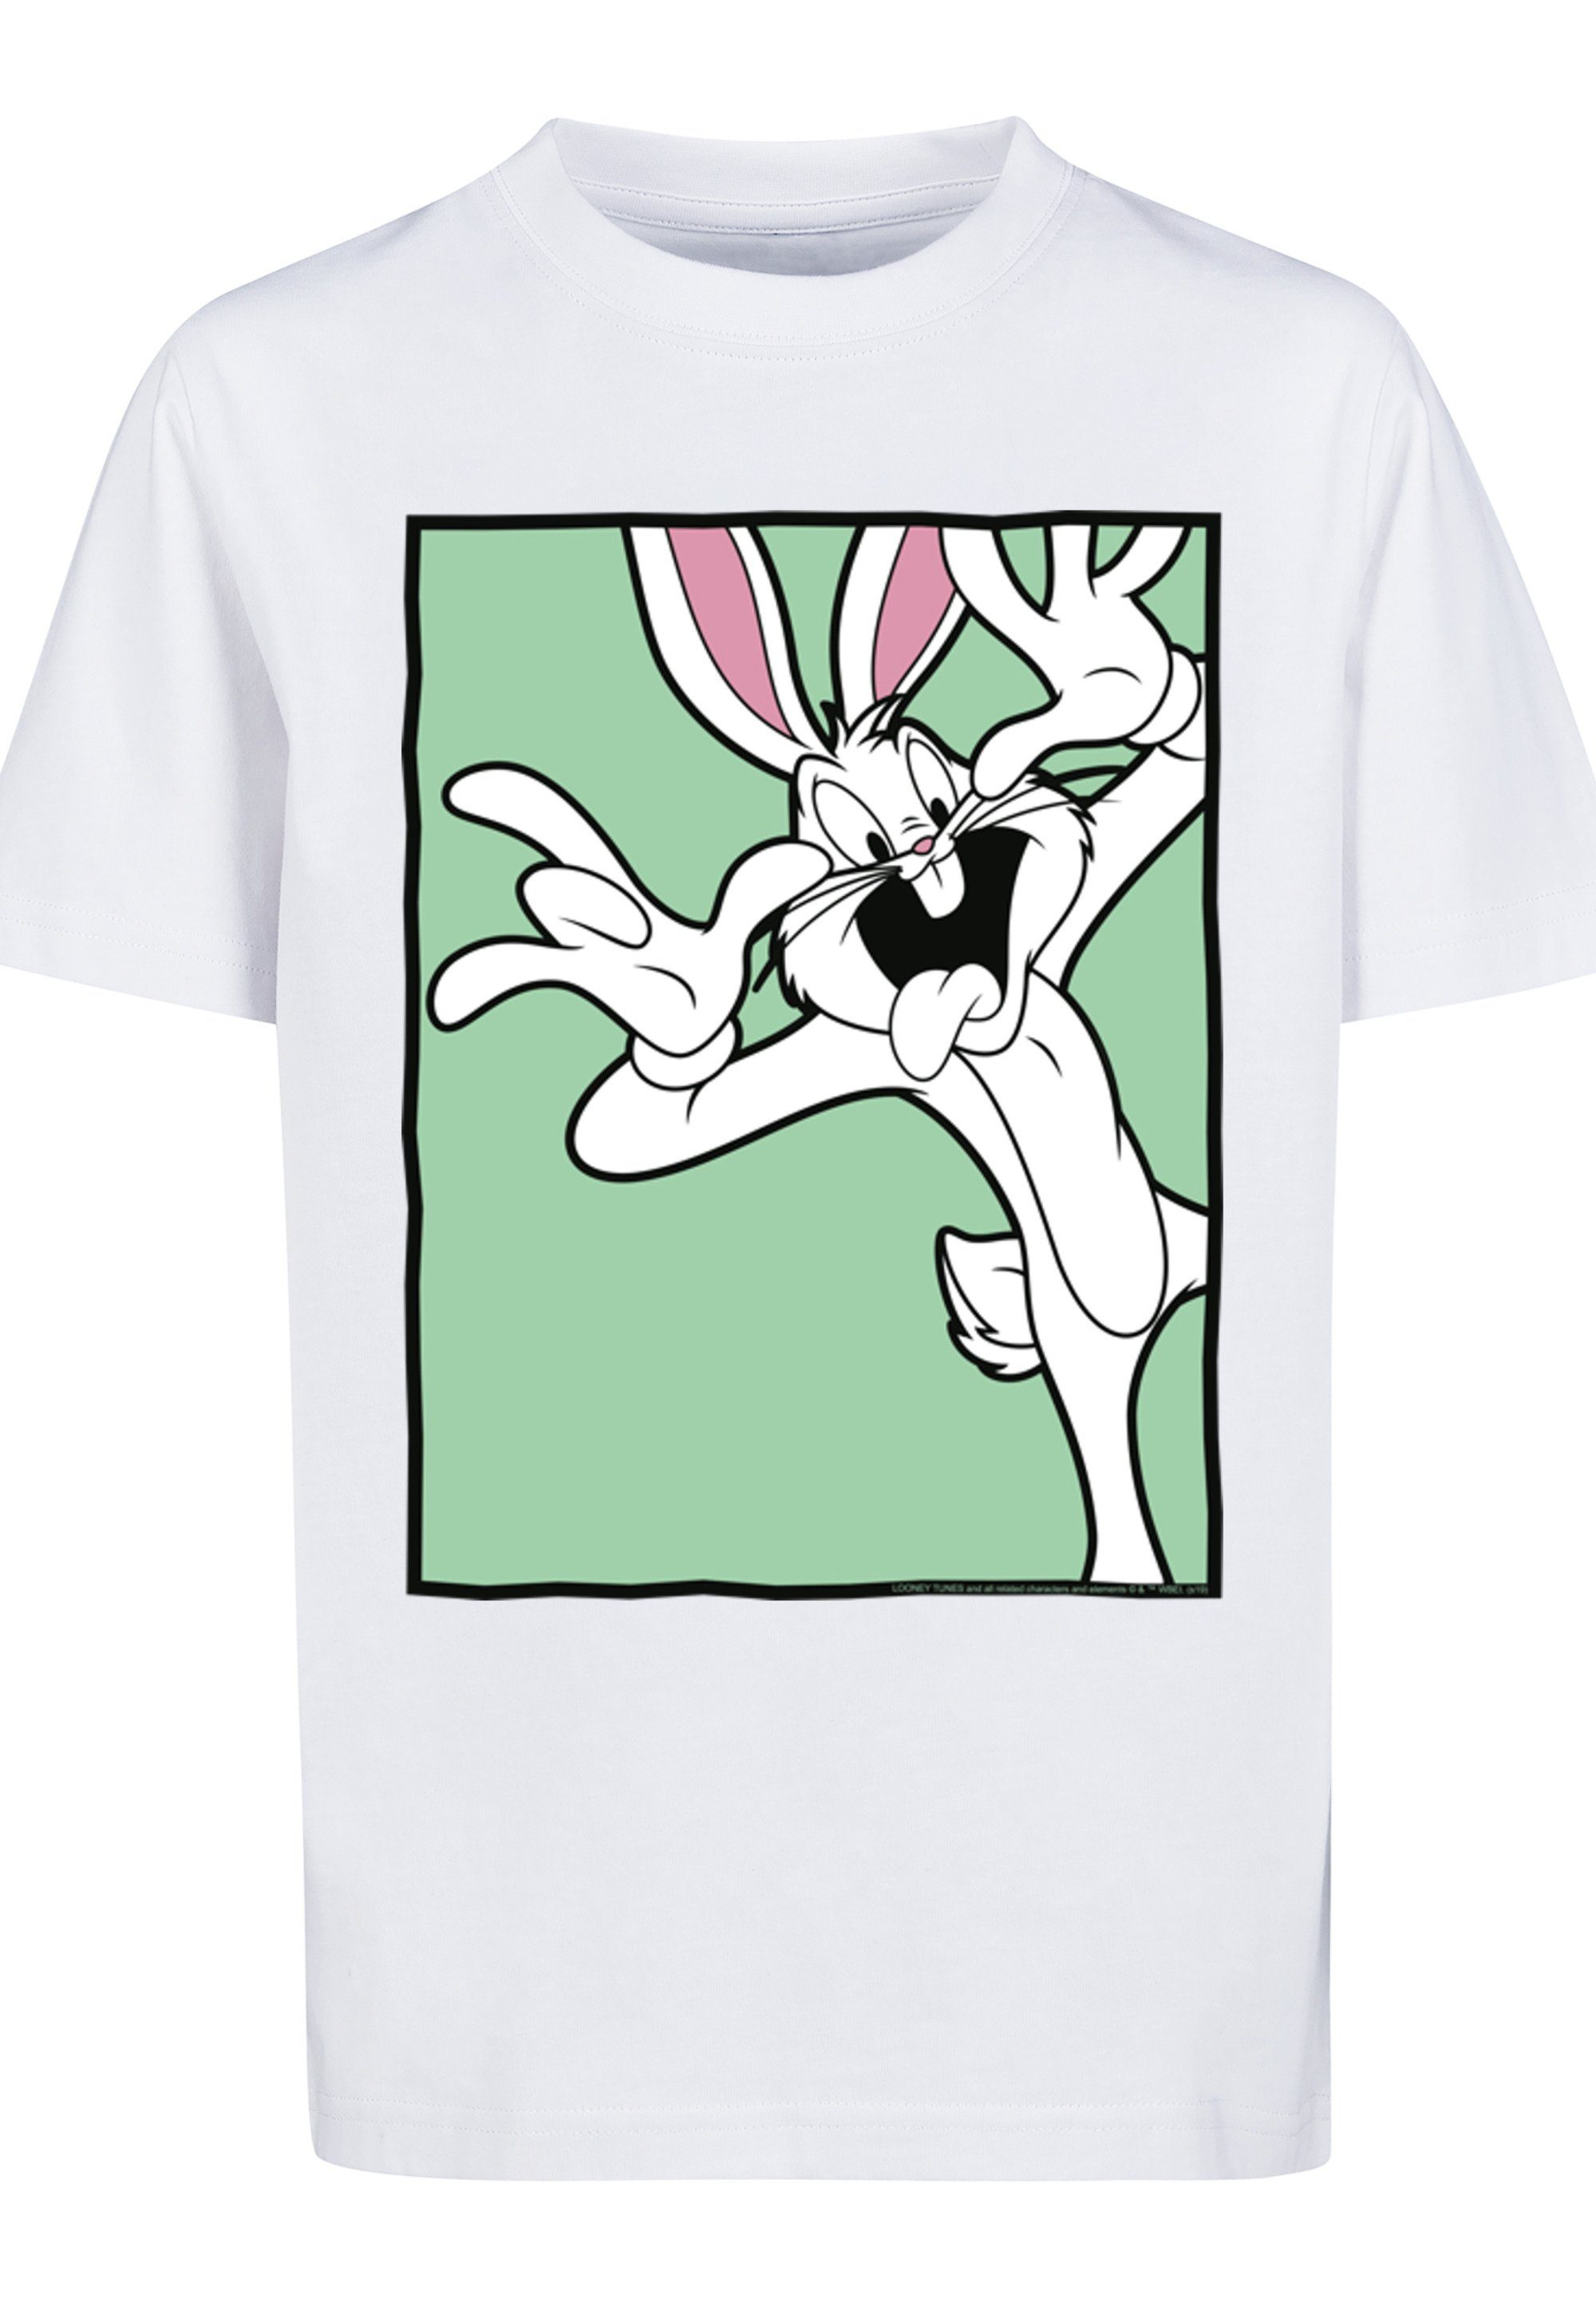 Funny Face T-Shirt Print Tunes F4NT4STIC Looney Bunny Bugs weiß